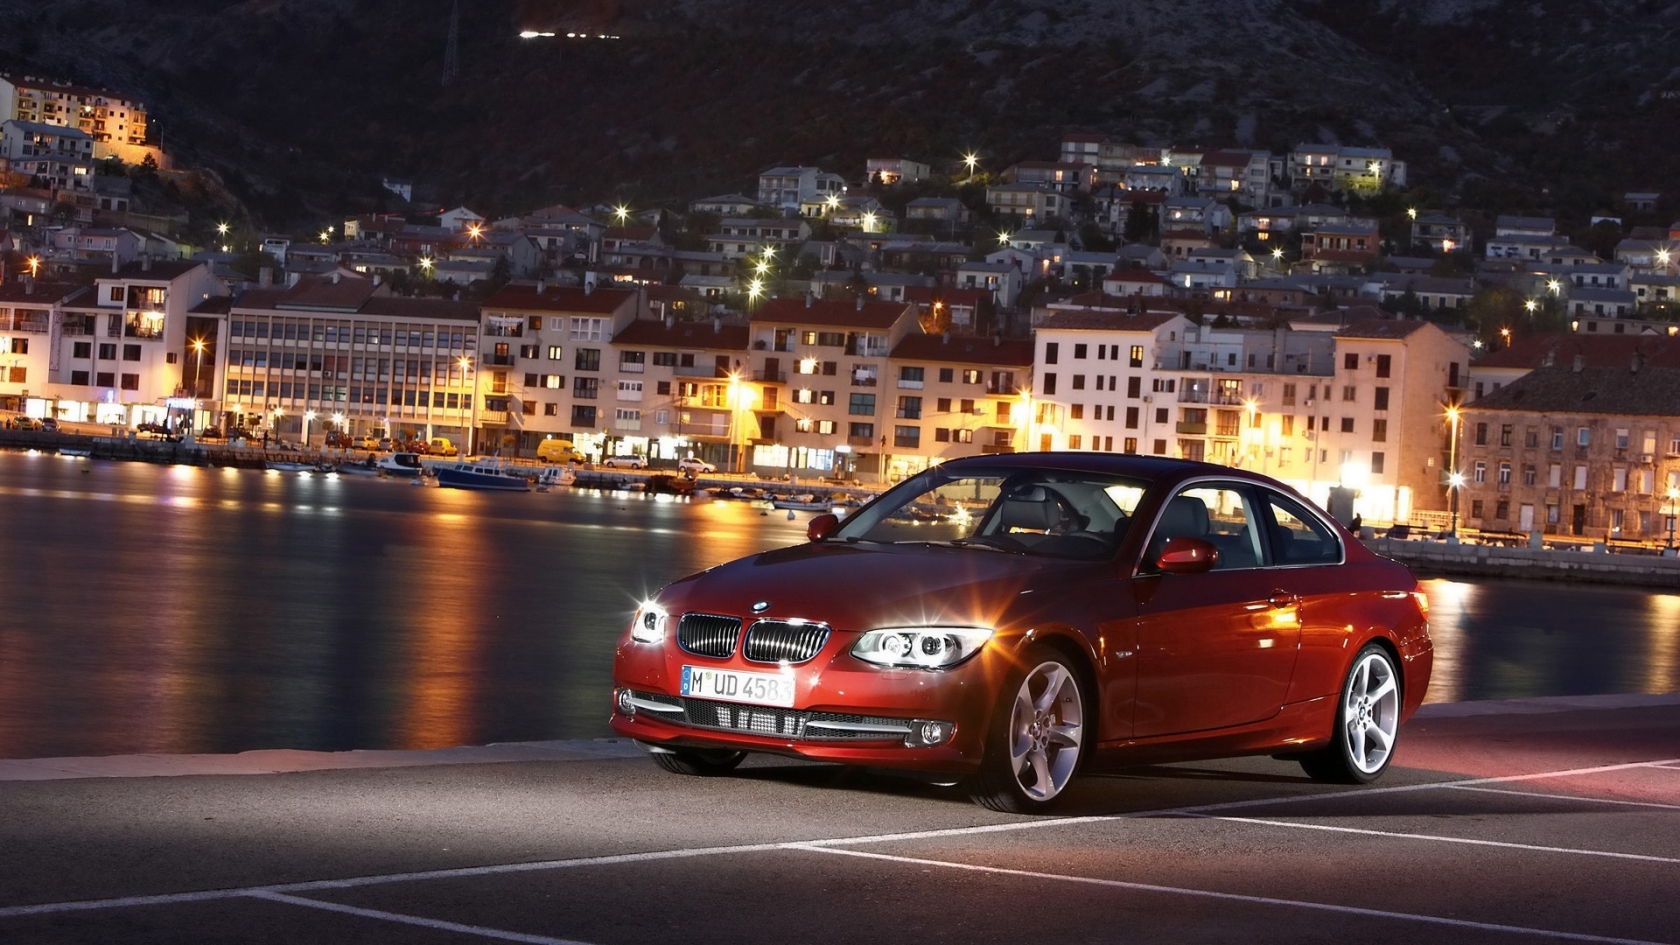 BMW 3 Series 2010 Red Sea Town for 1680 x 945 HDTV resolution